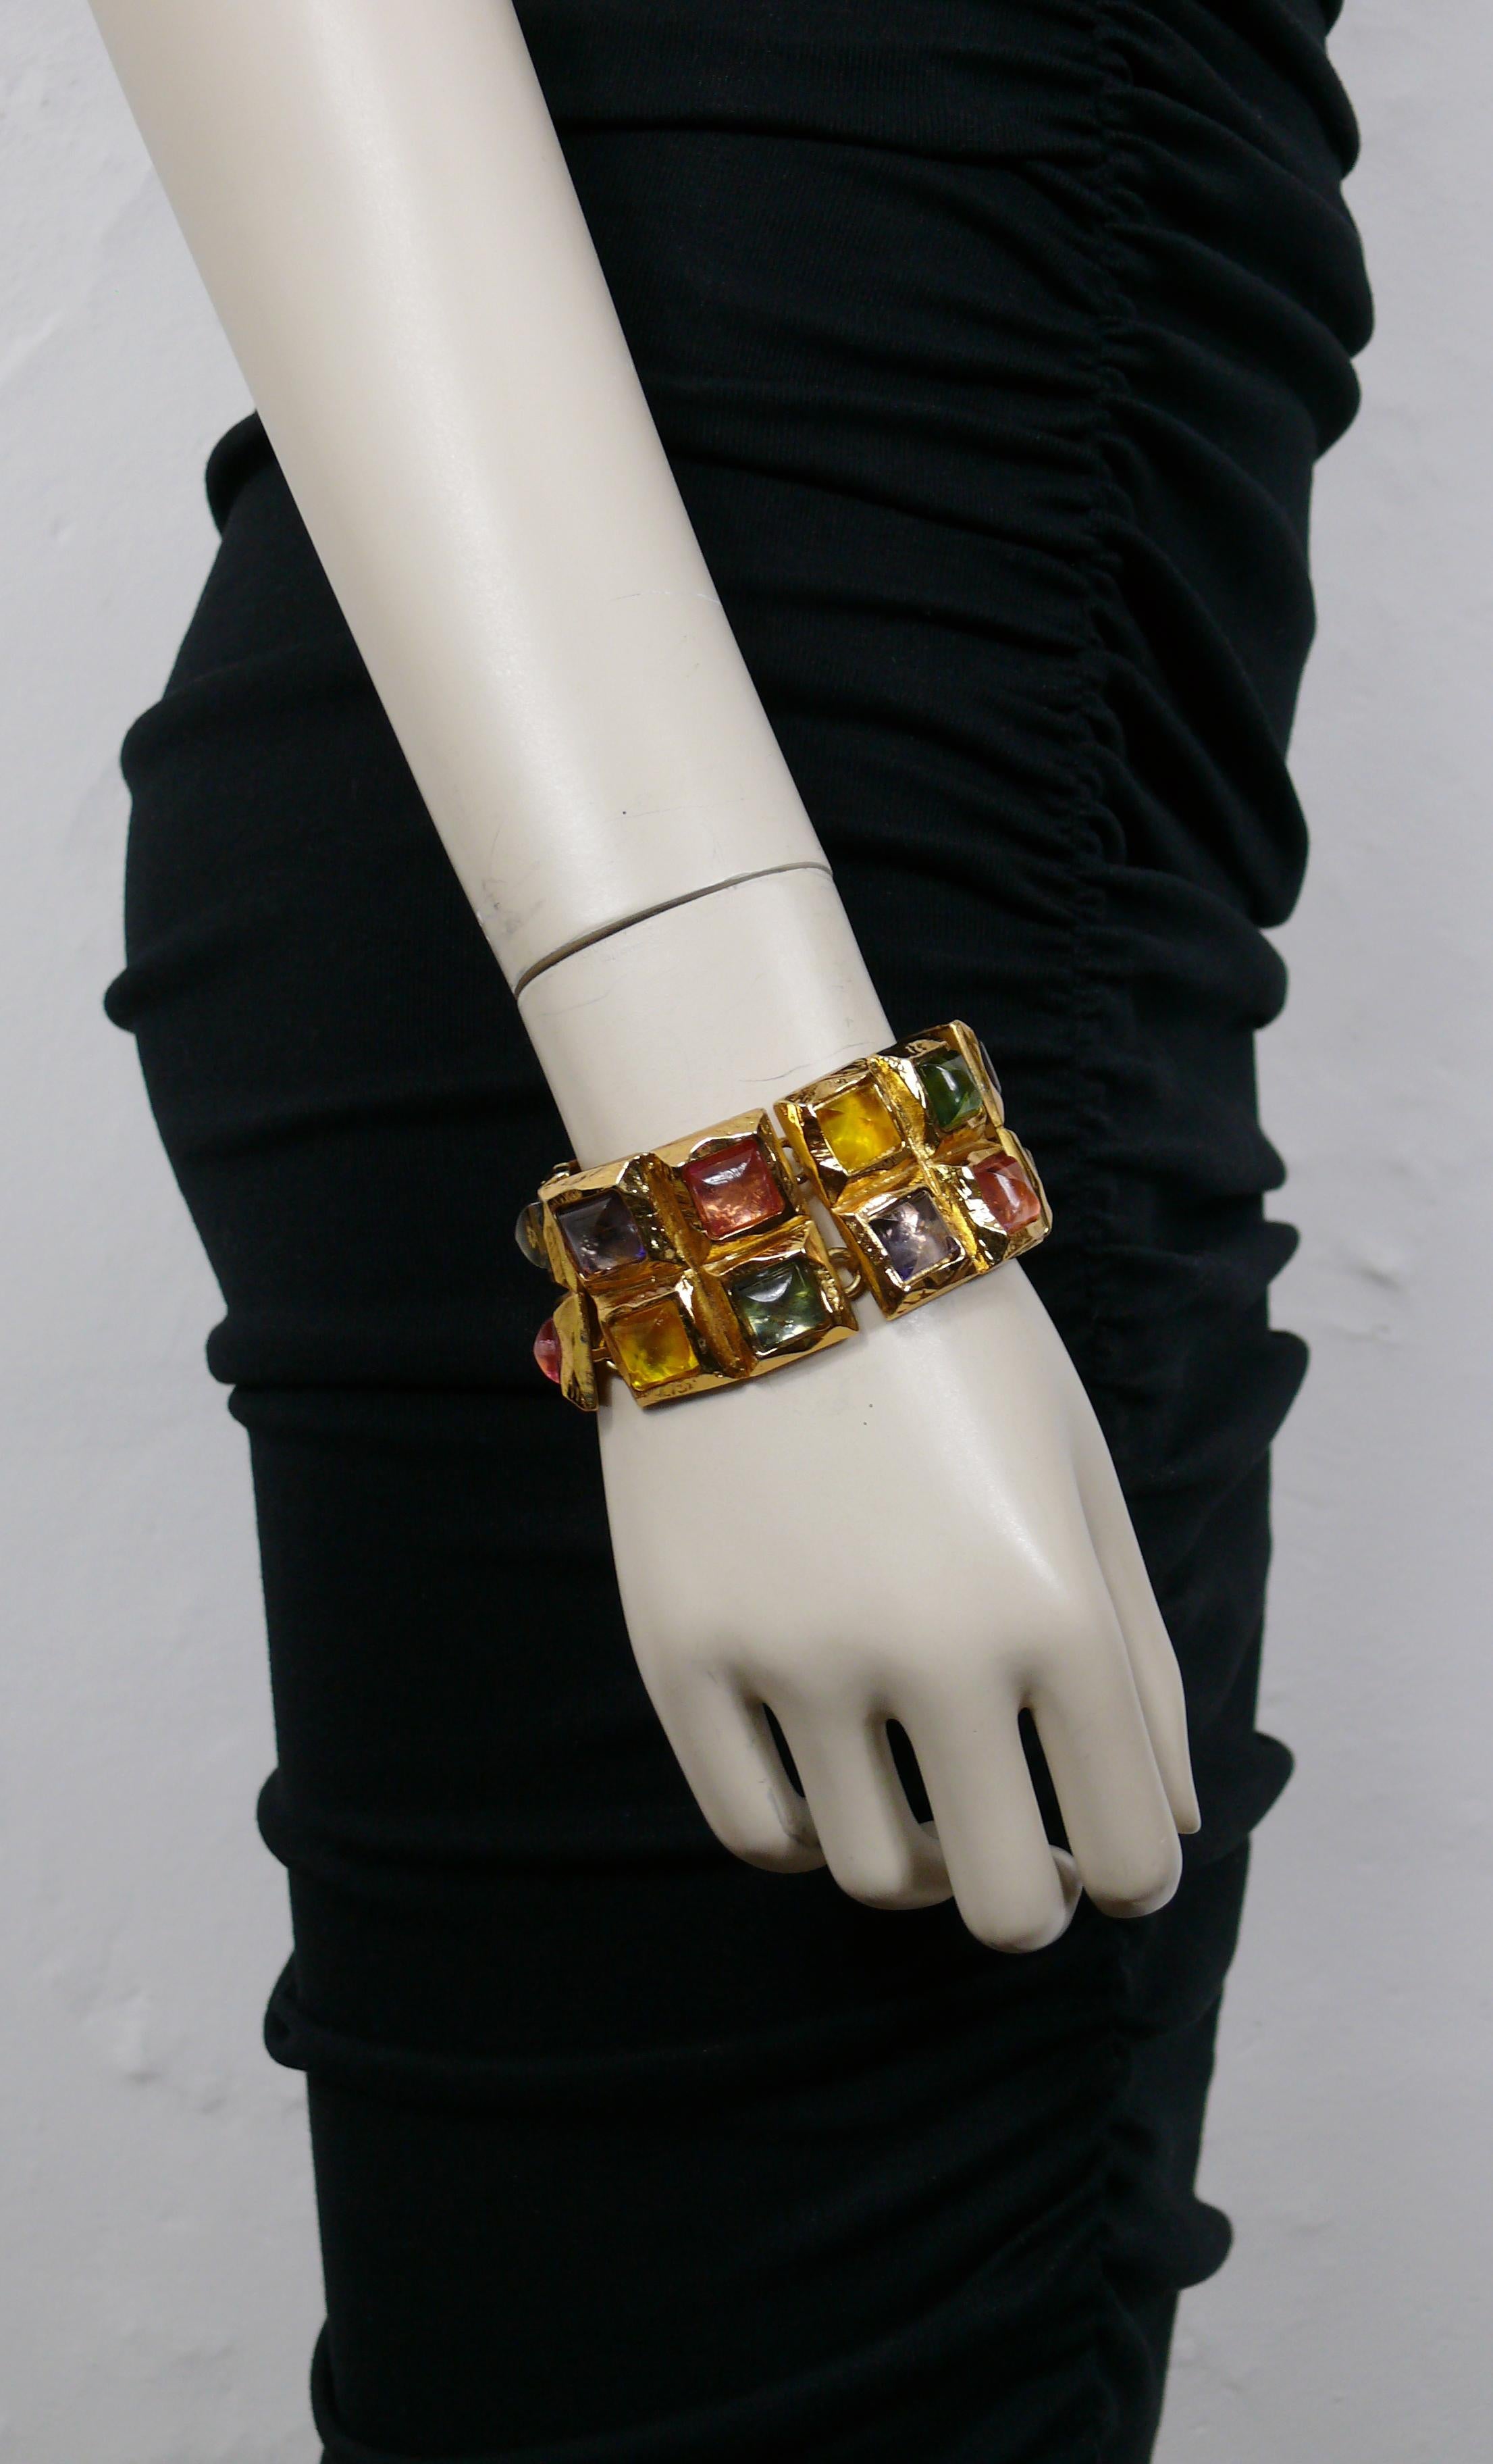 EDOUARD RAMBAUD vintage gold toned articulated cuff bracelet featuring 5 textured square links embellished with multicolored resin cabochons.

Embossed EDOUARD RAMBAUD Paris.

Indicative measurements : length approx. 18 cm (7.09 inches) / width